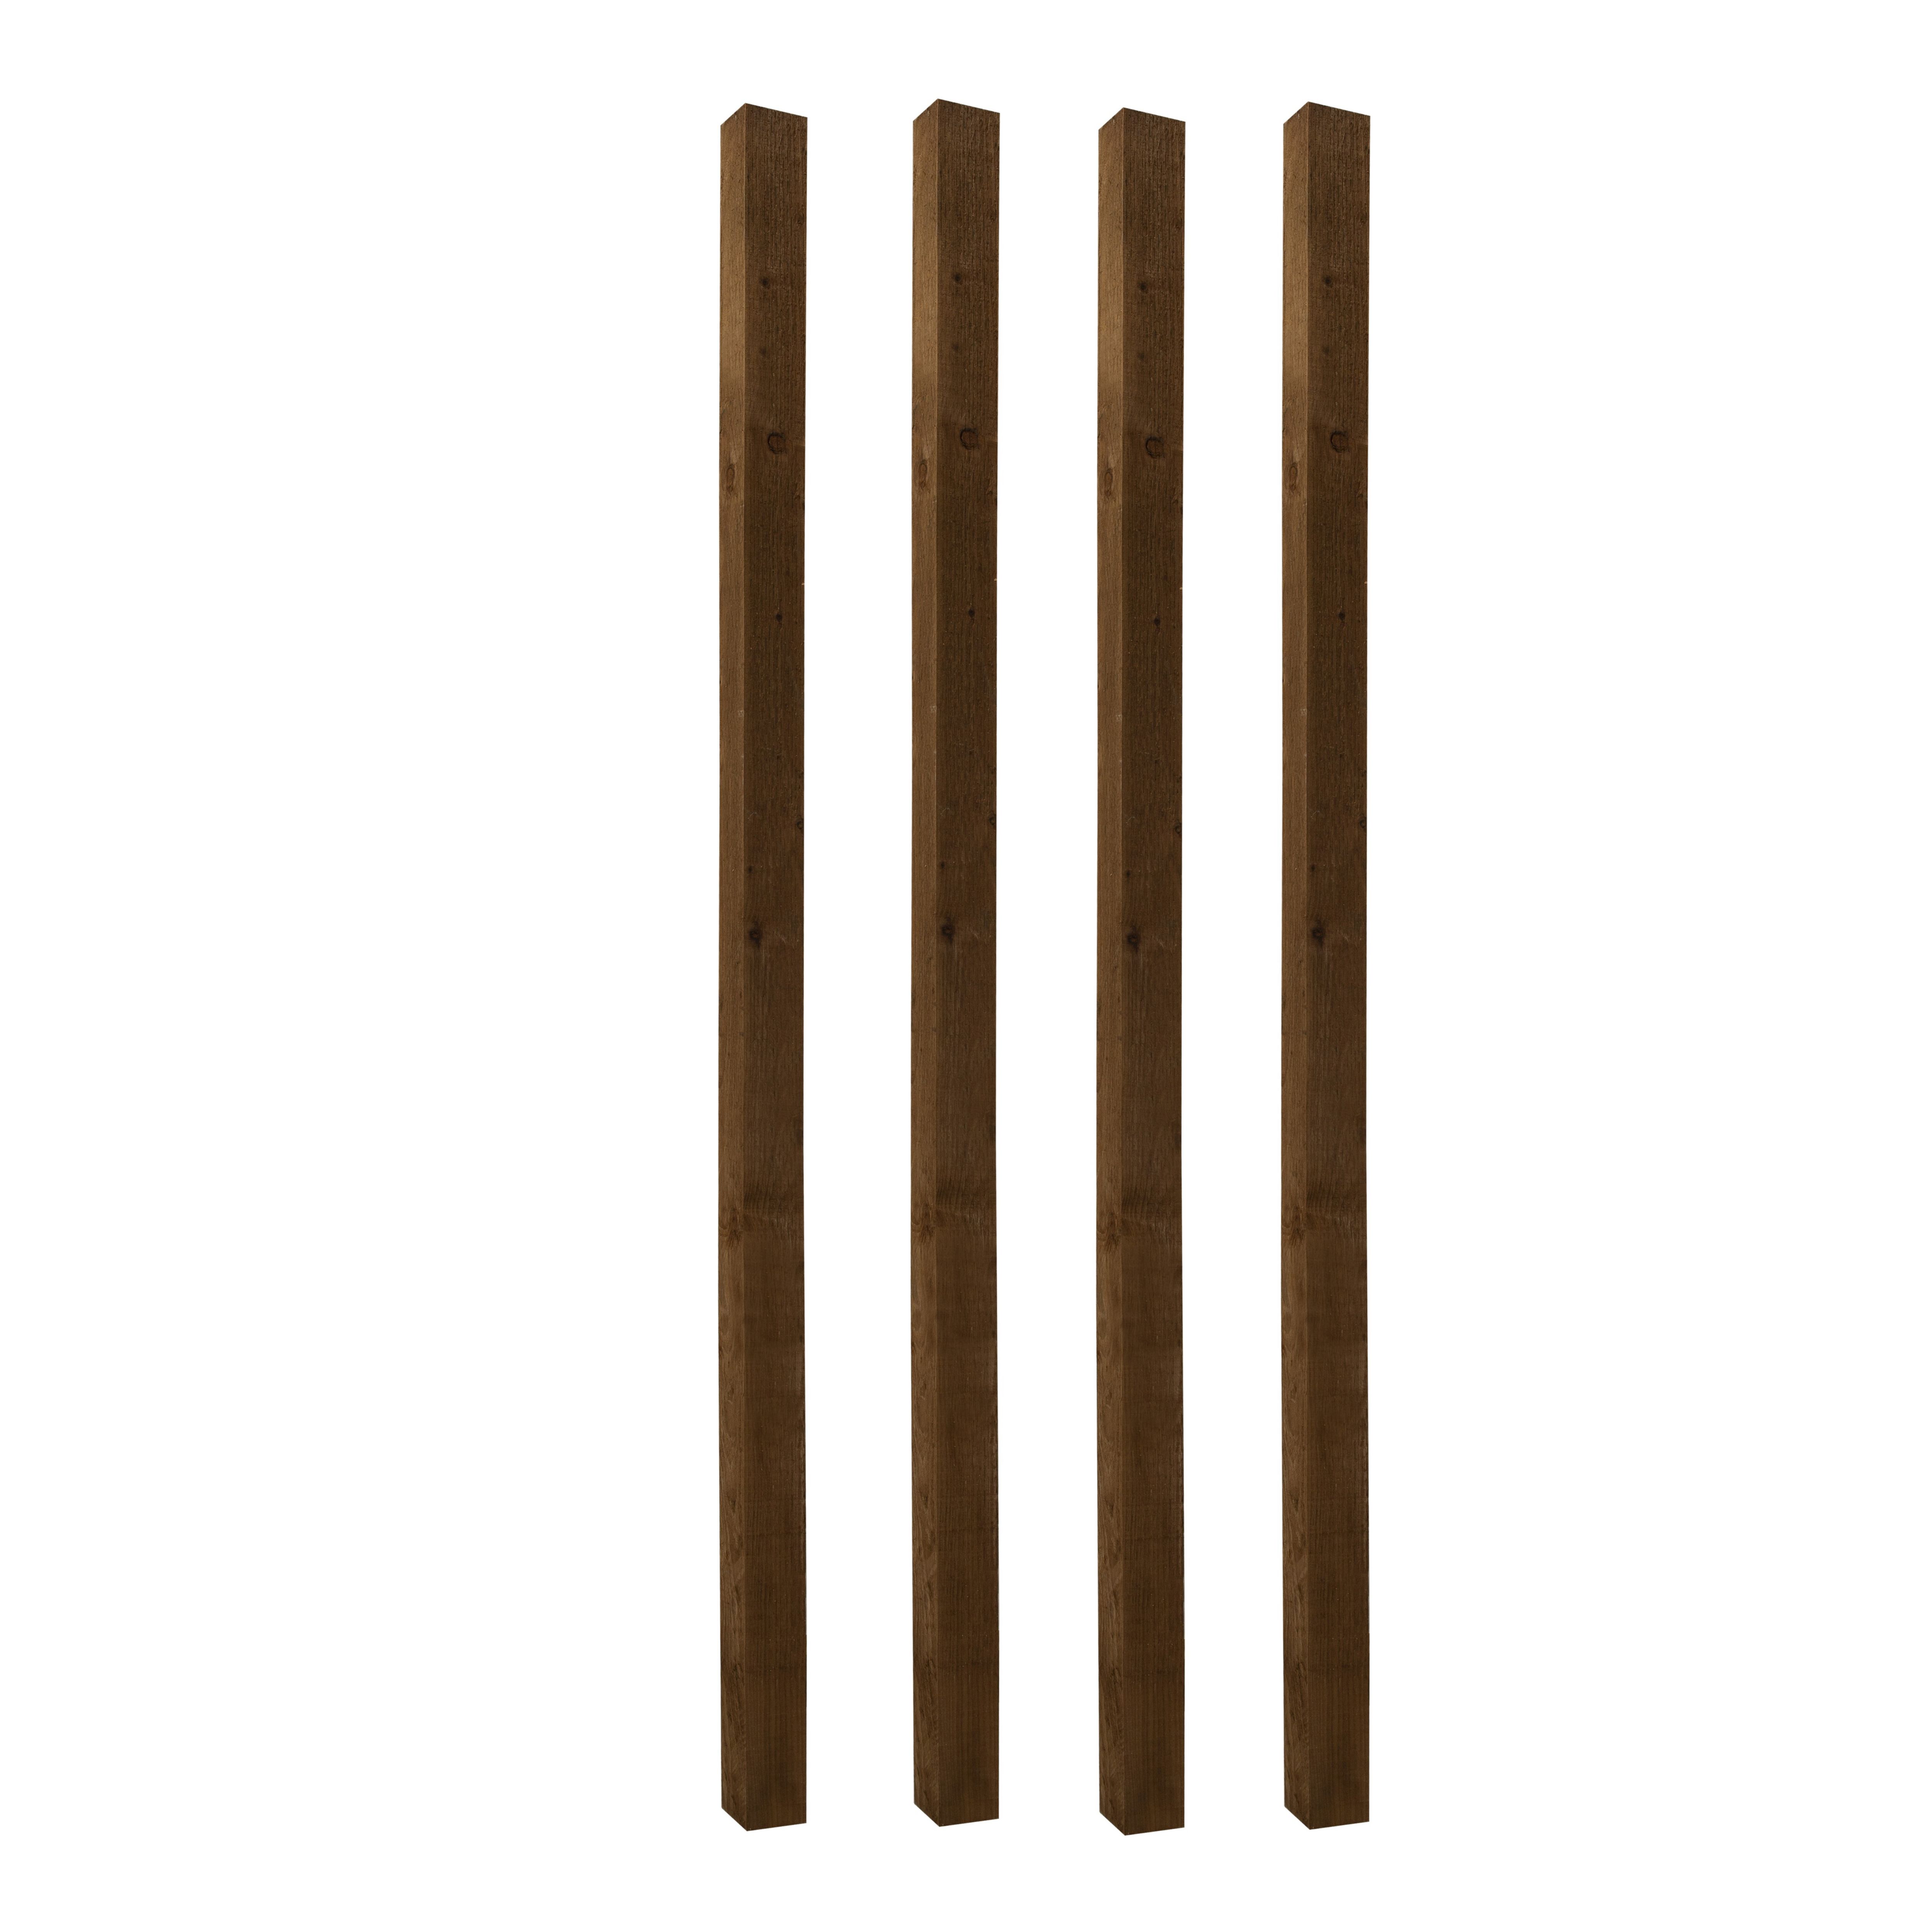 UC4 Brown Square Wooden Fence post (H)2.1m (W)75mm, Pack of 4